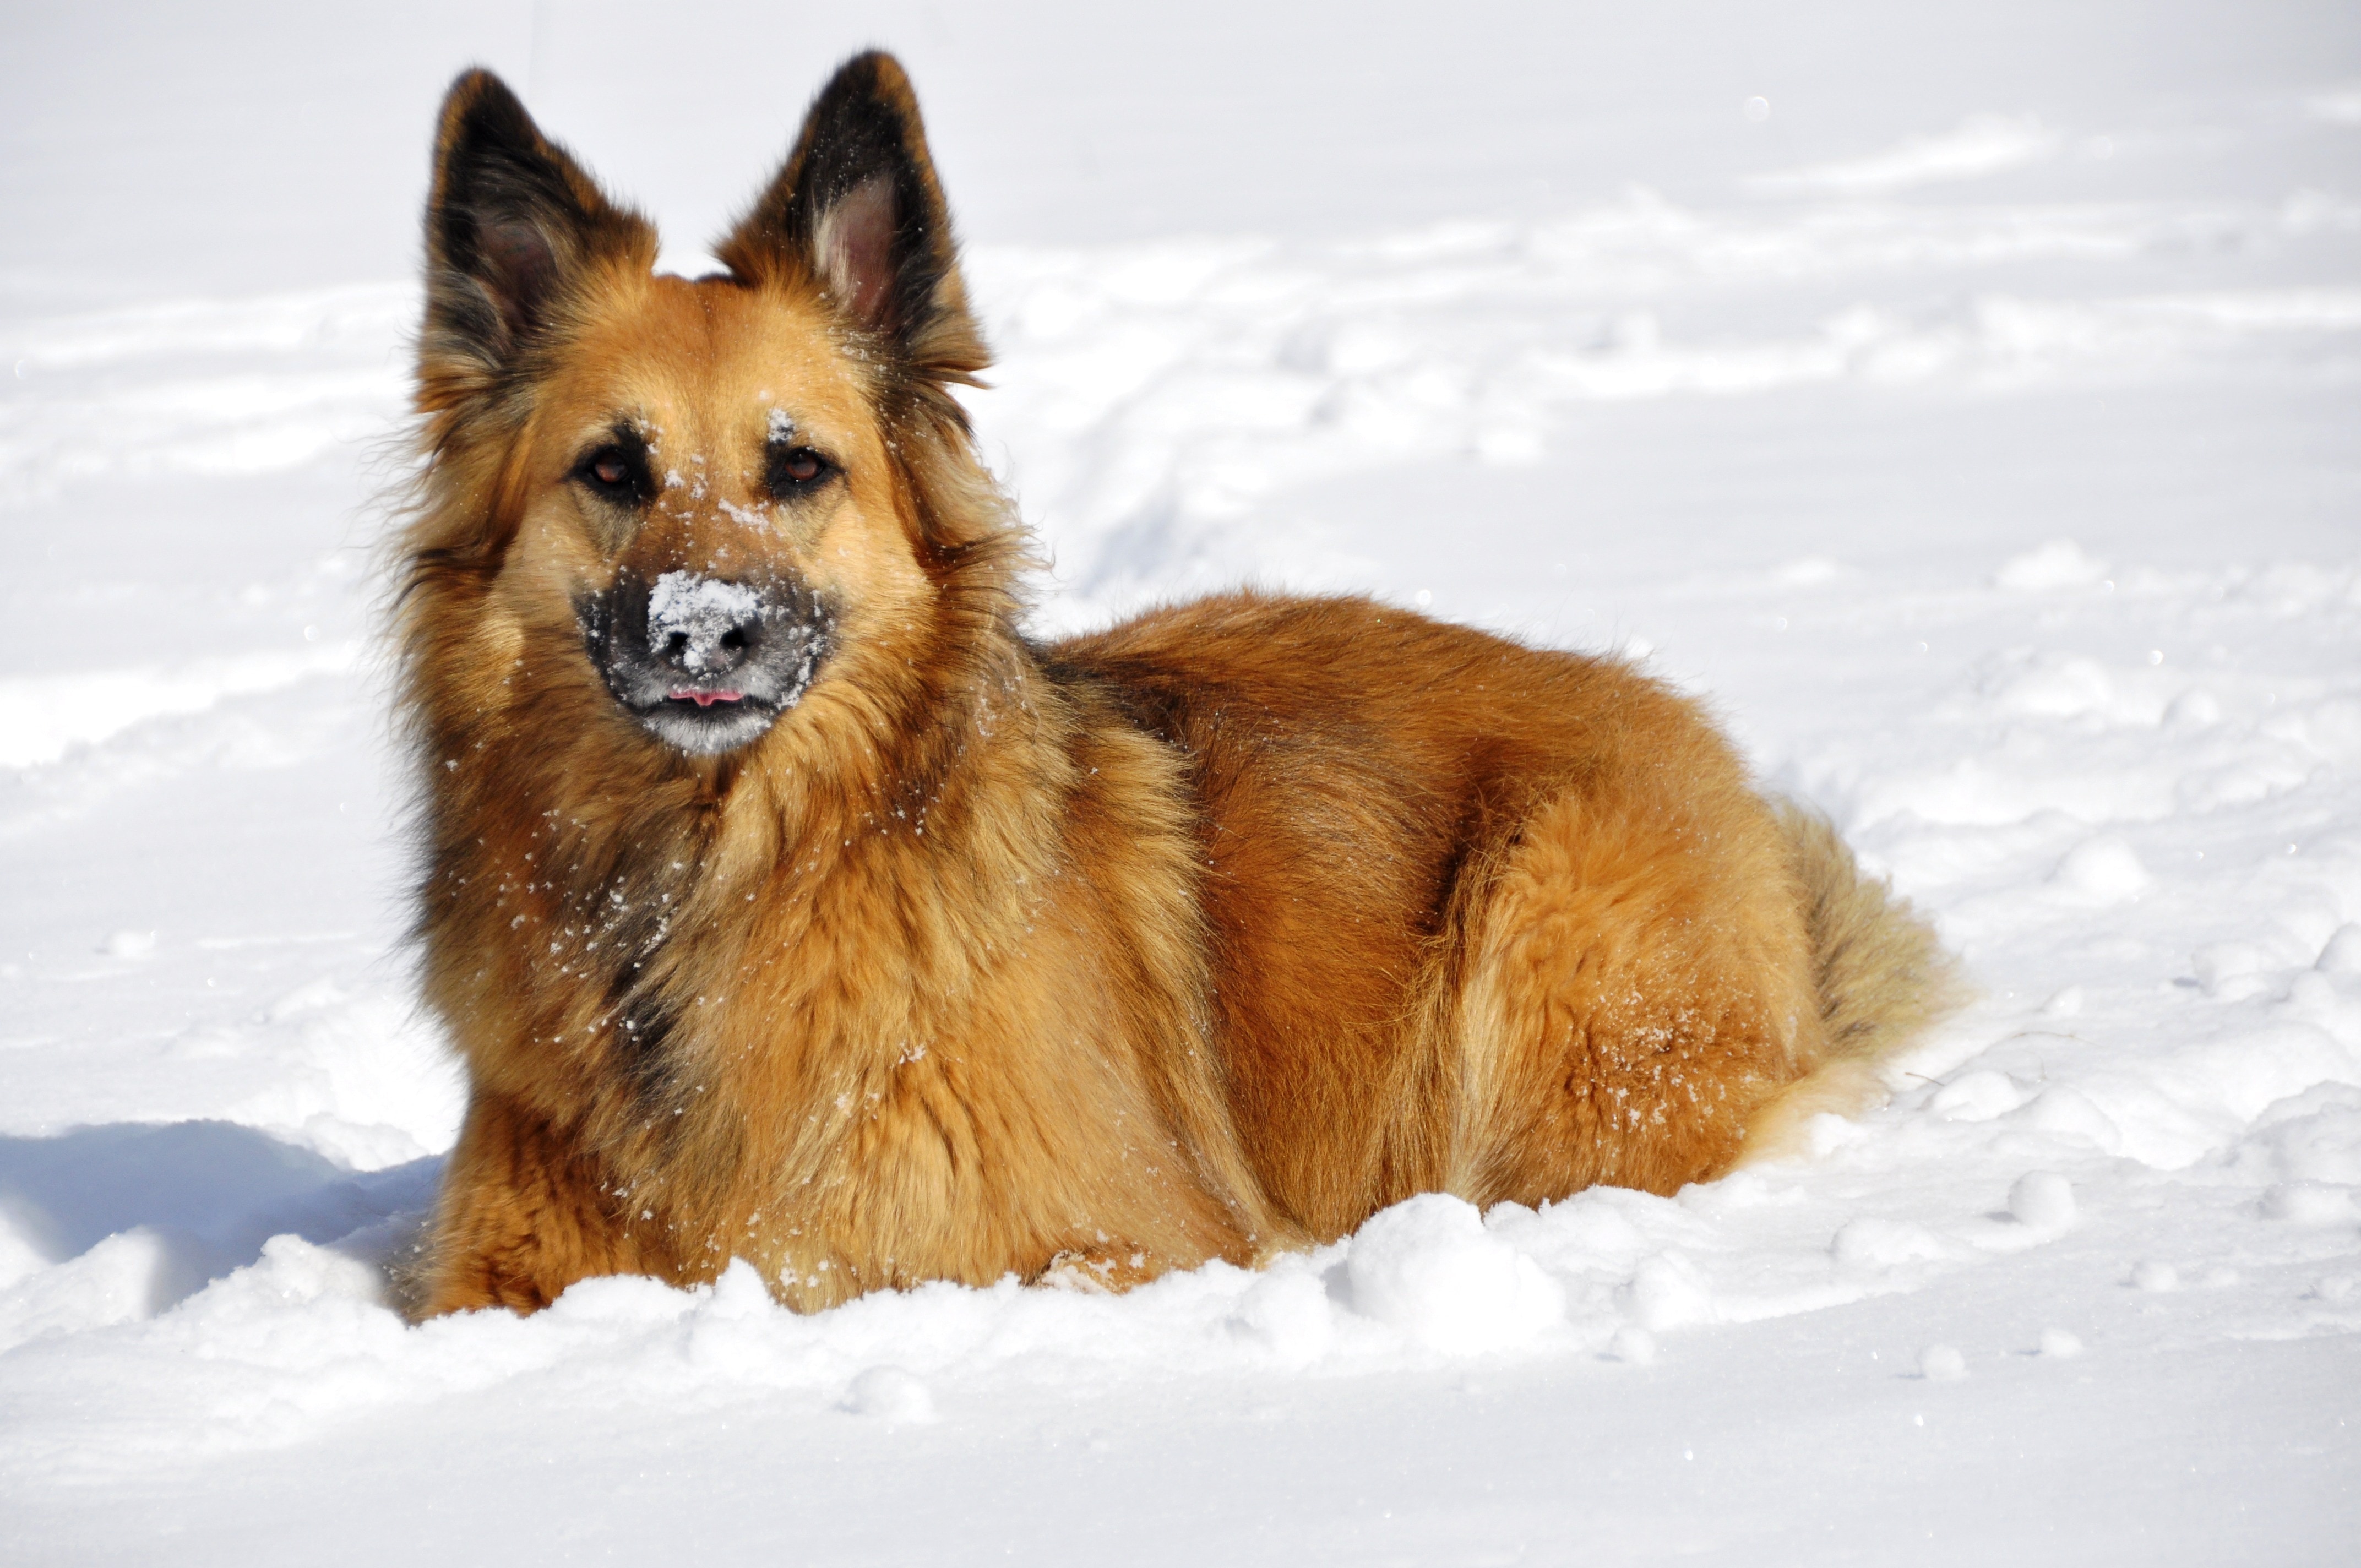 Snow, Dog, Winter, Concerns, White, Play, snow, cold temperature